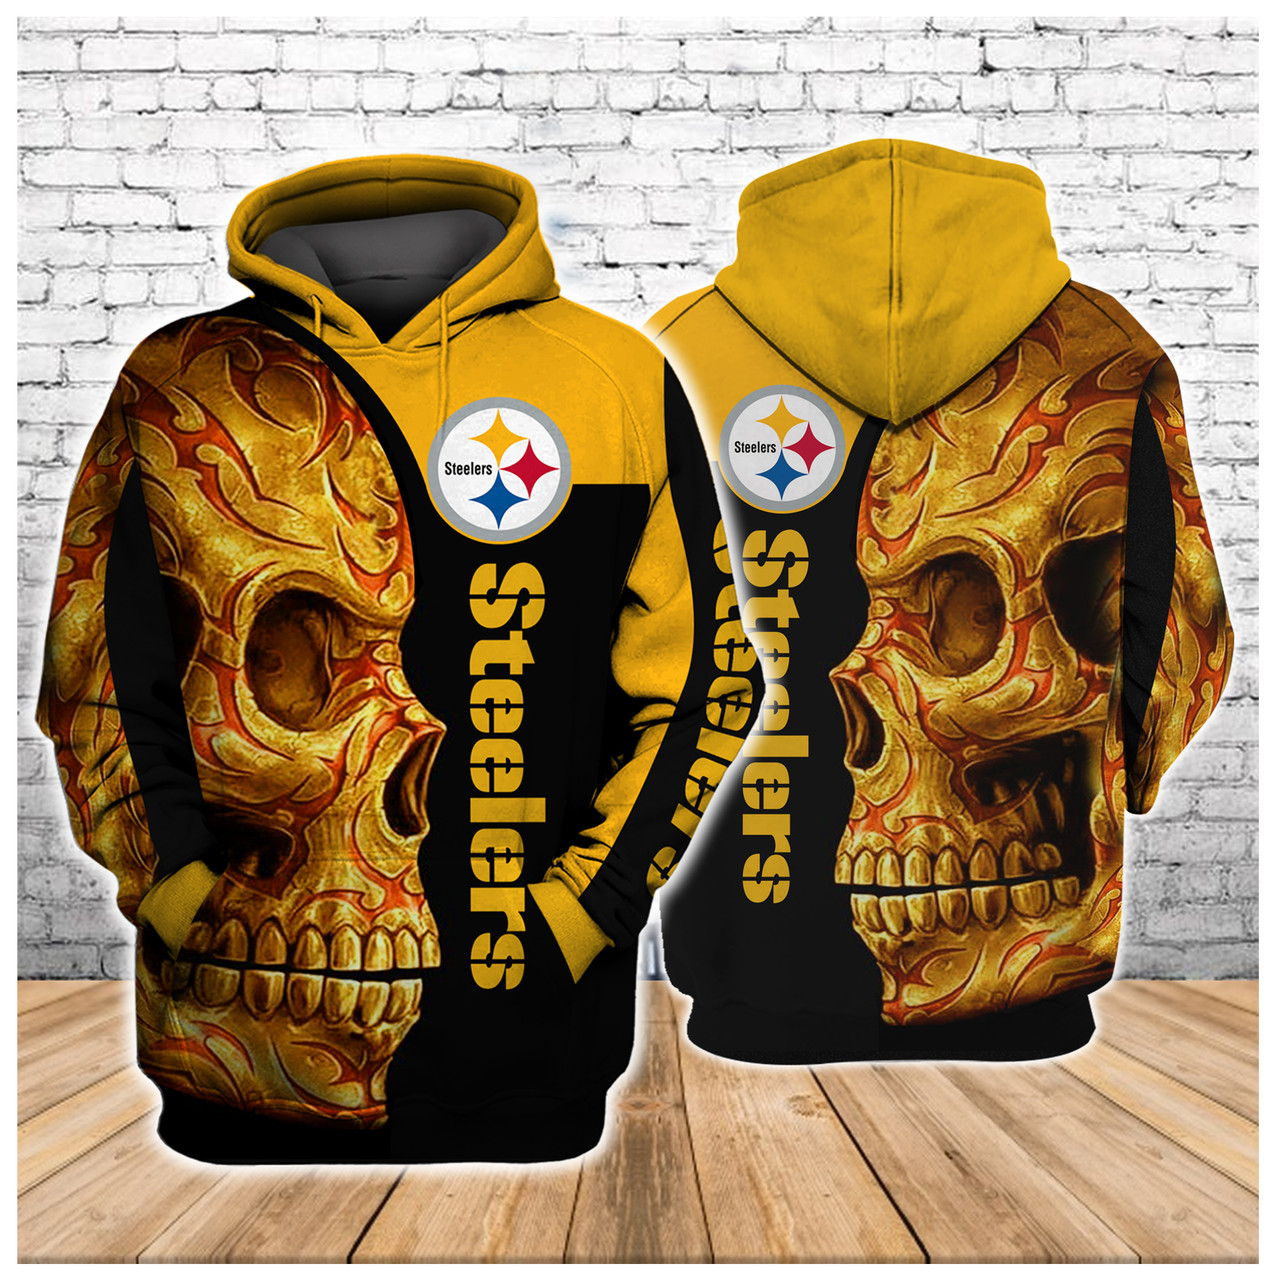 OFFICIAL-N.F.L.PITTSBURGH-STEELERS 